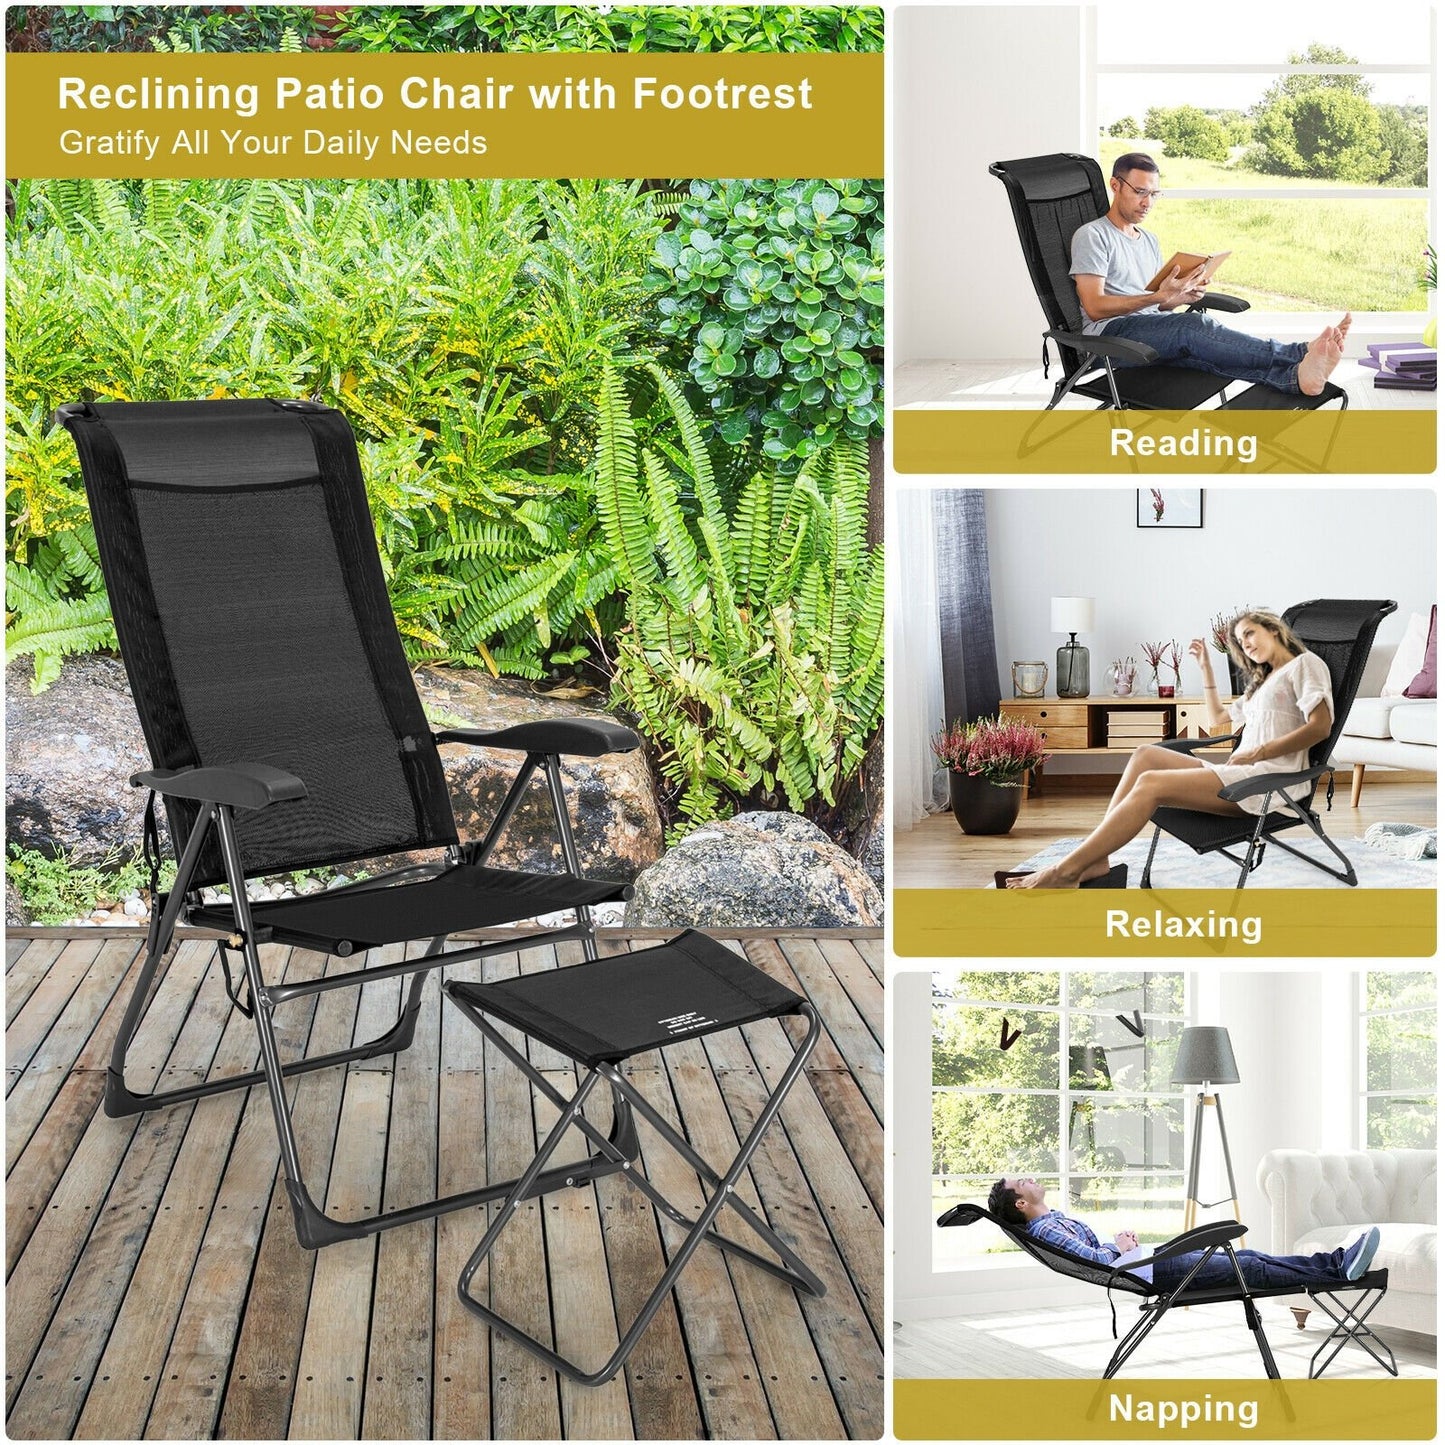 4 Pieces Patio Adjustable Back Folding Dining Chair Ottoman Set, Black at Gallery Canada